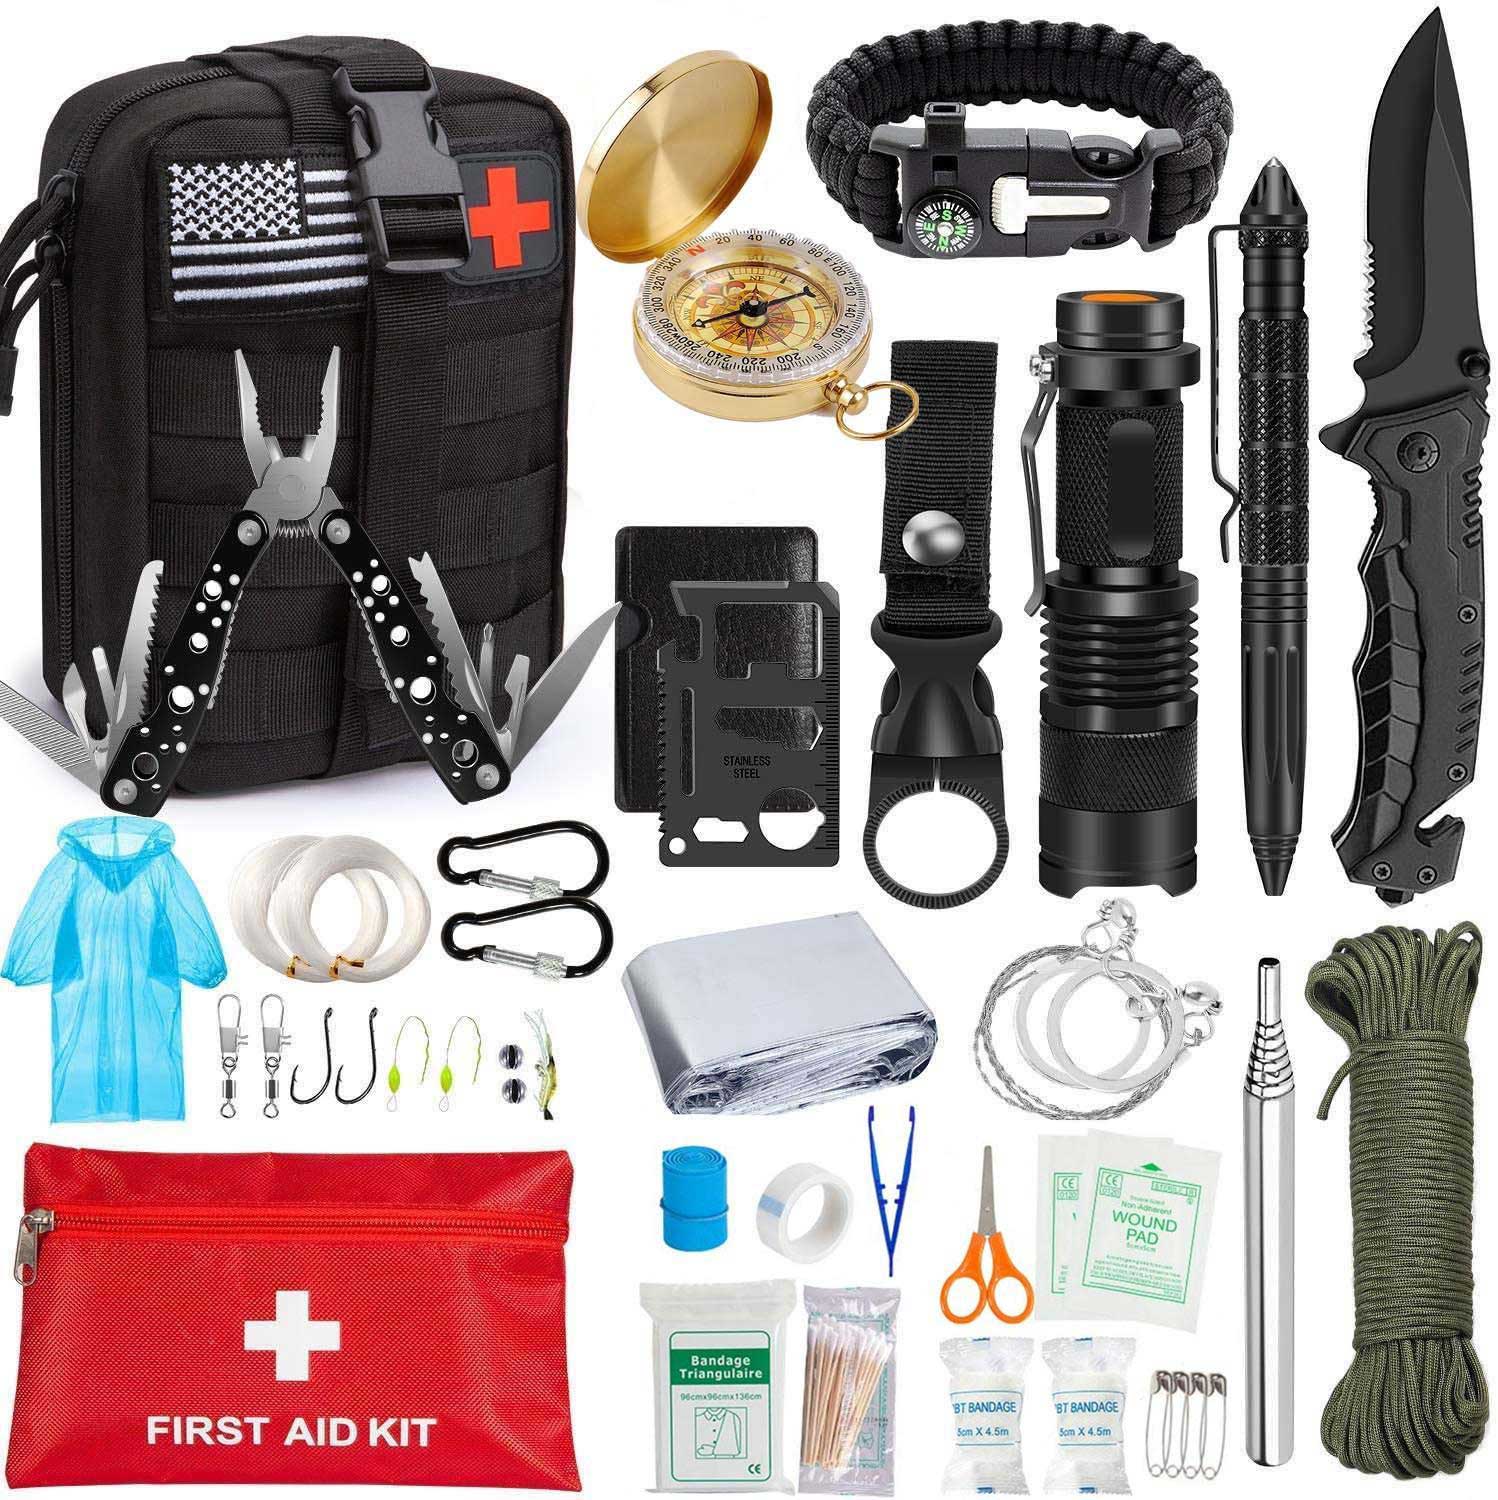 Survival kit <br> First aid